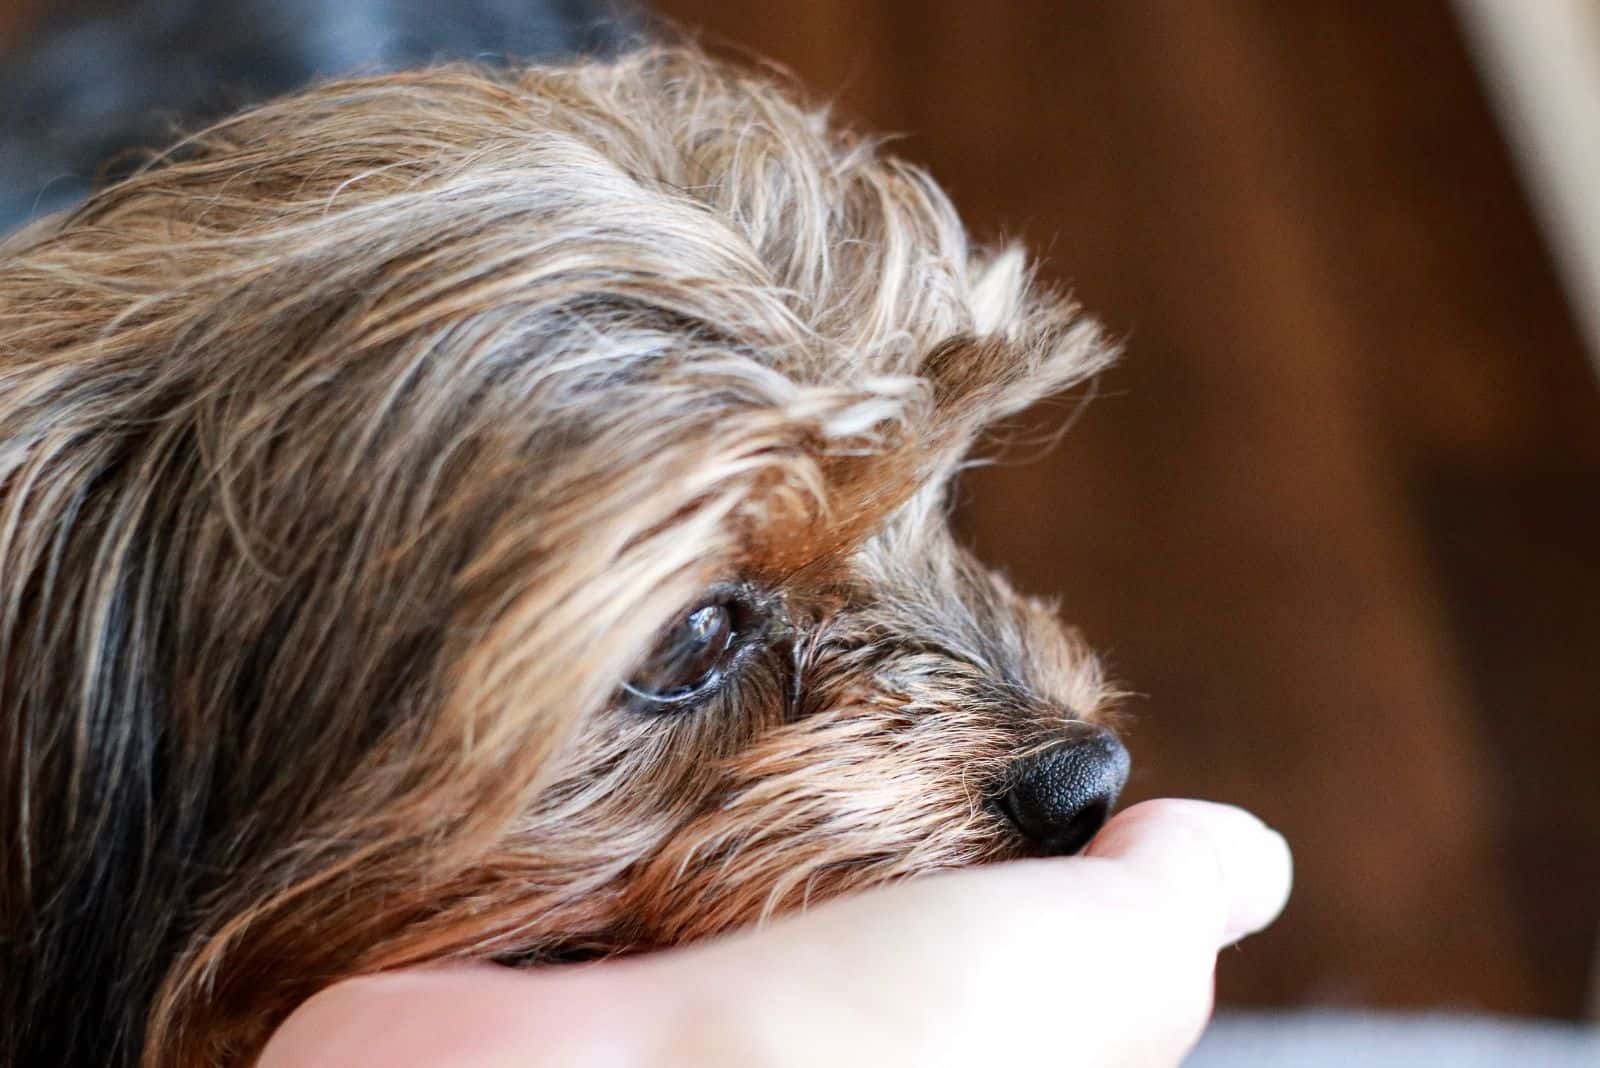 yorkie mix dog resting his head on the owners hand